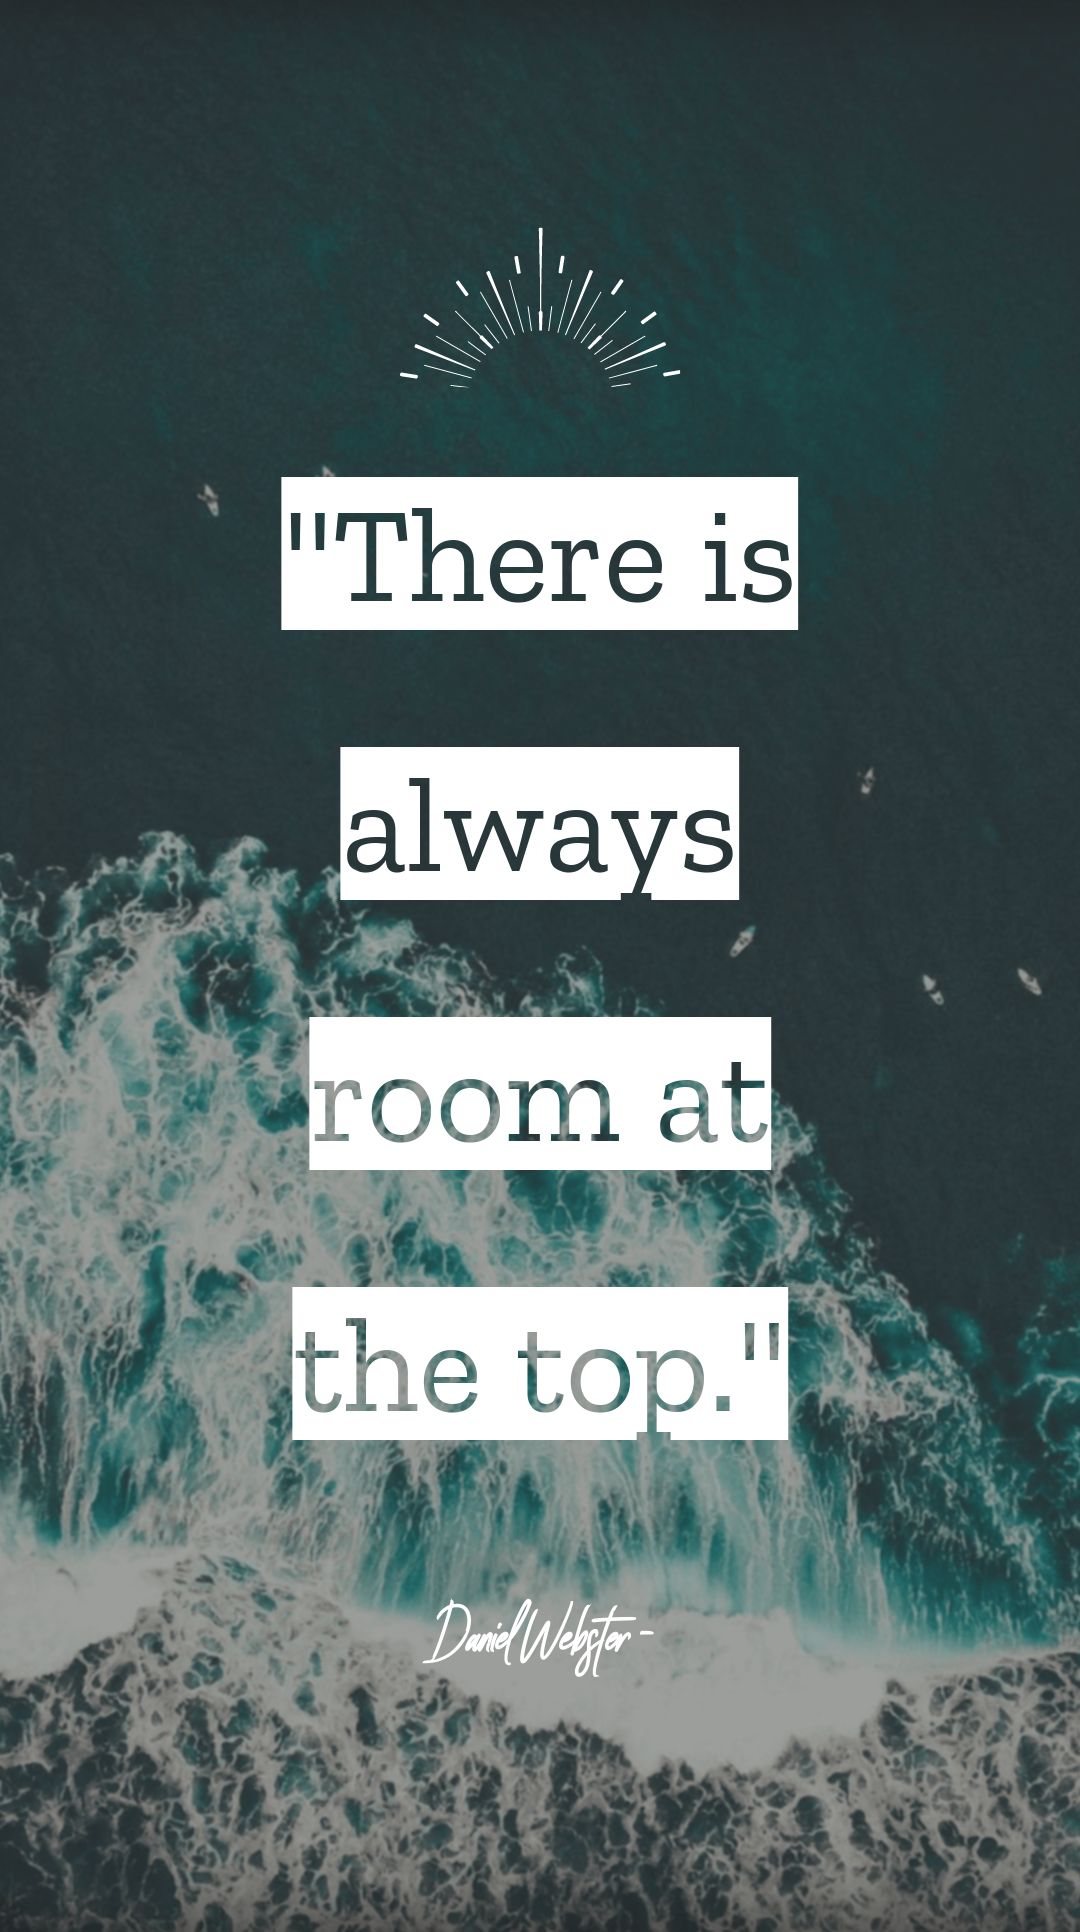 Daniel Webster - There is always room at the top.